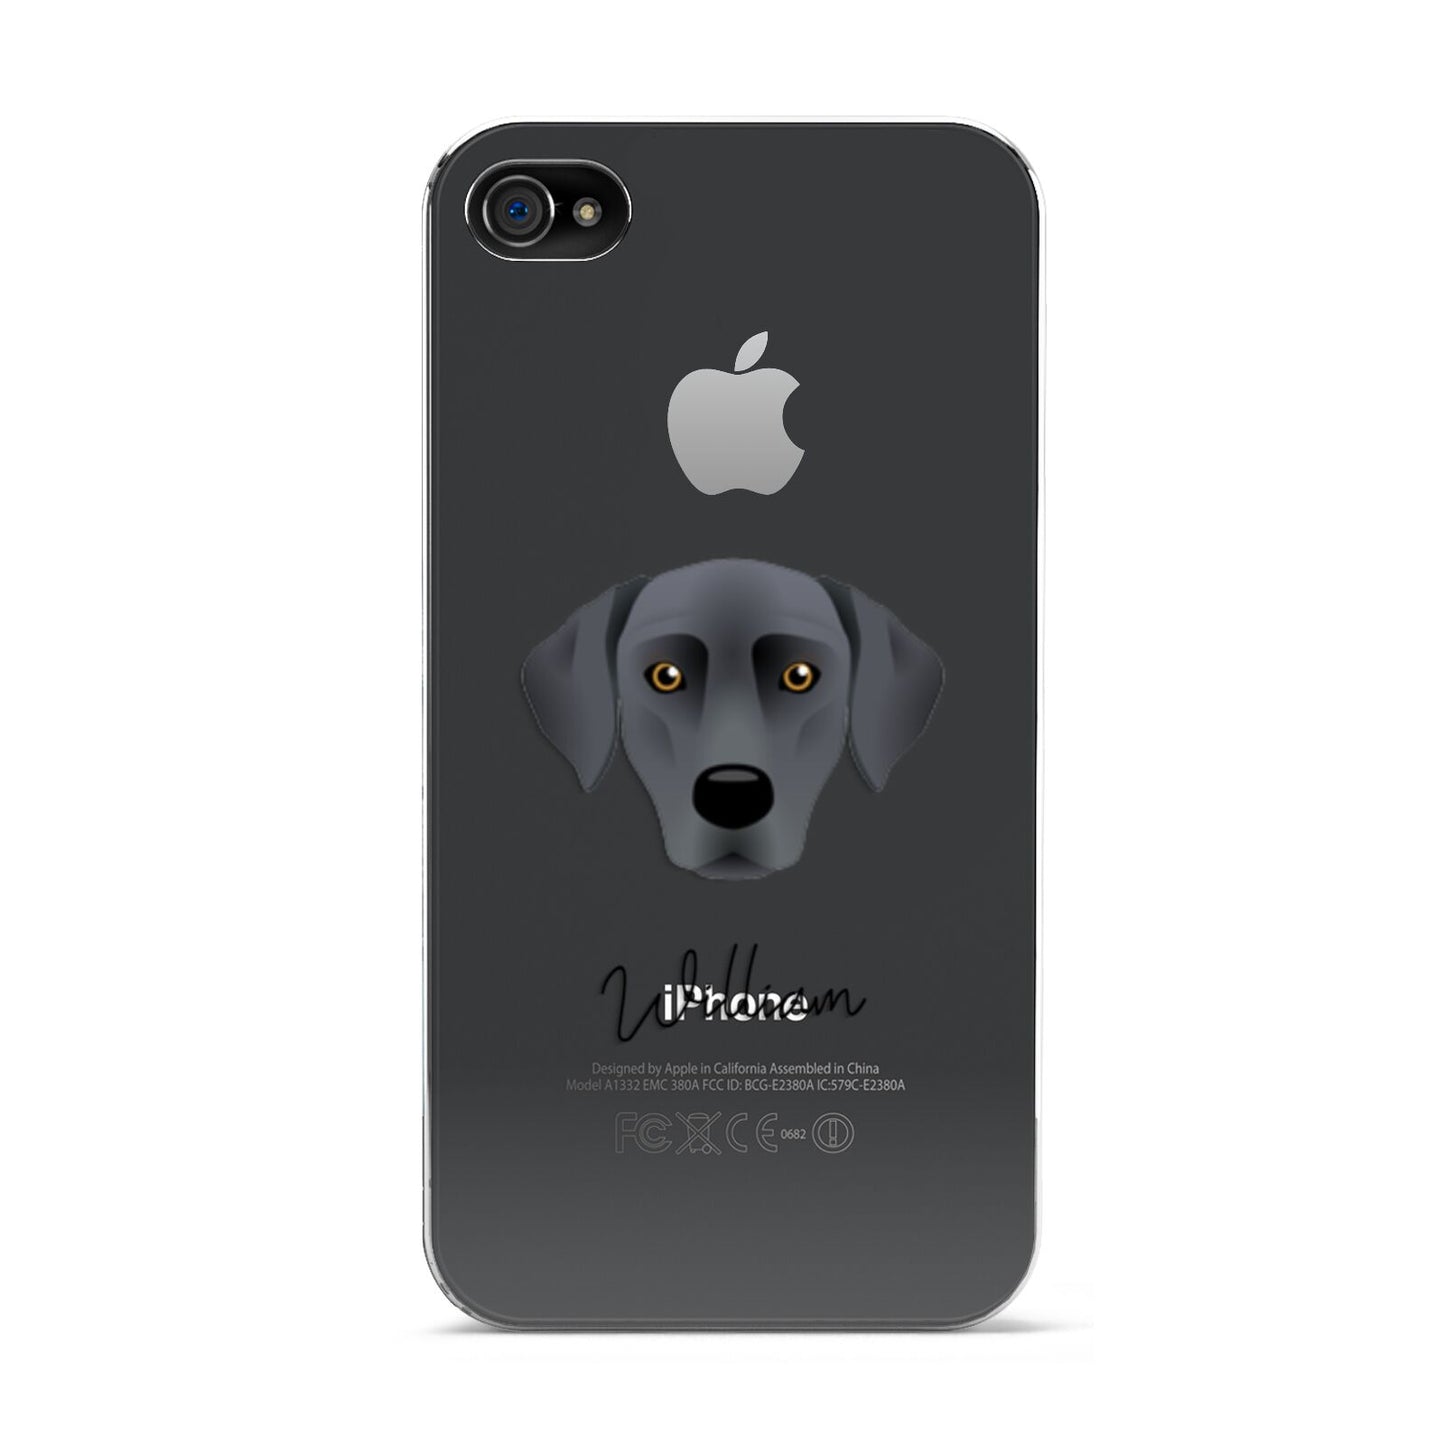 Blue Lacy Personalised Apple iPhone 4s Case